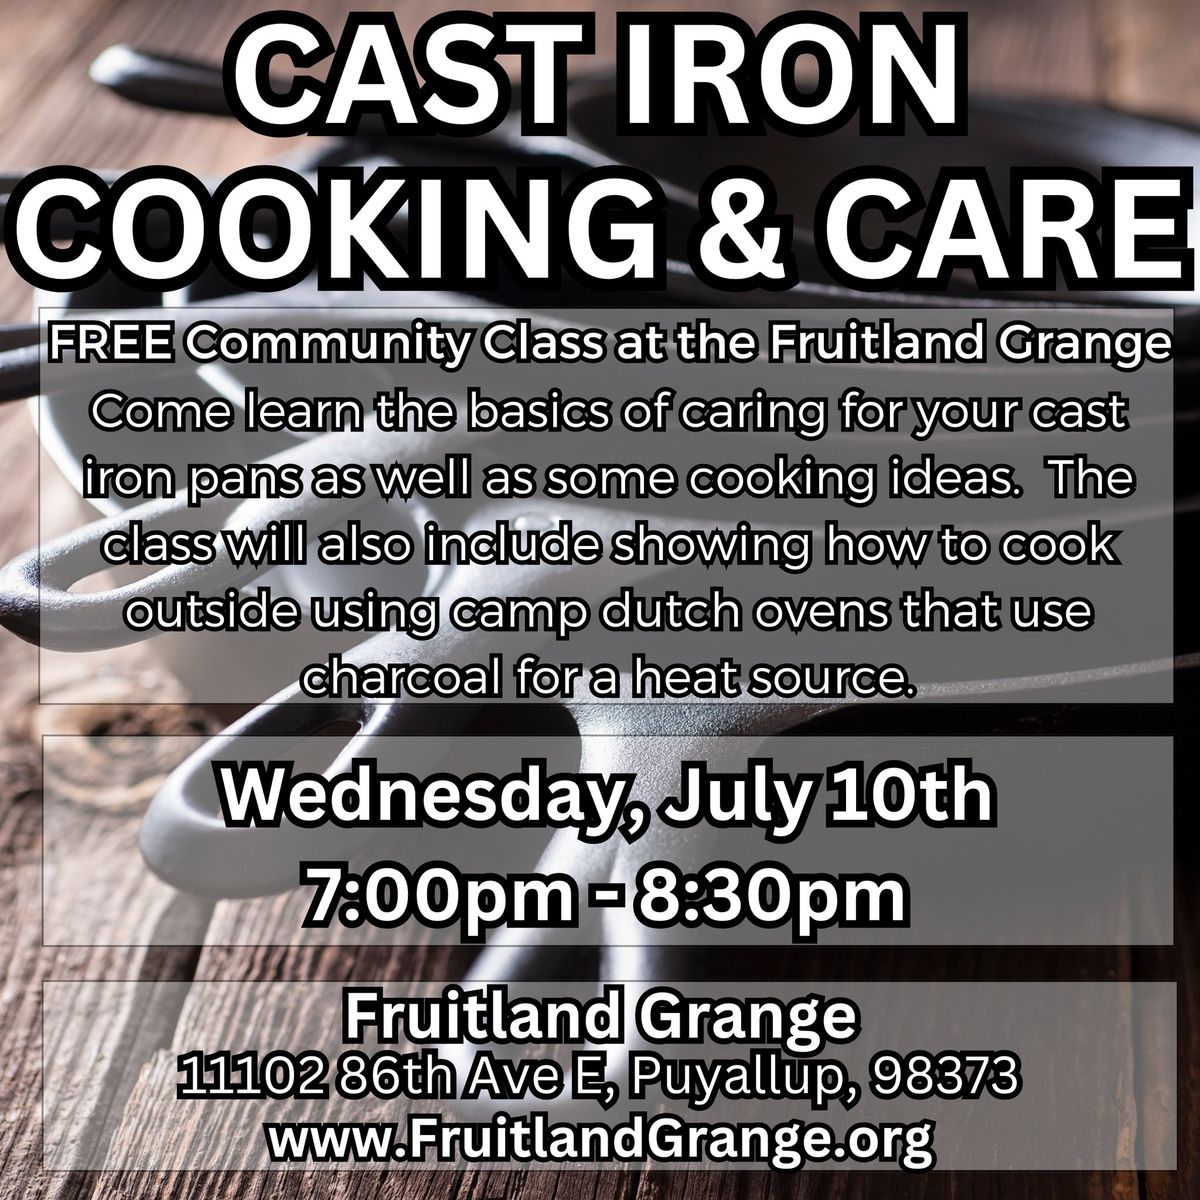 Cast Iron Cooking & Care - Free Community Class